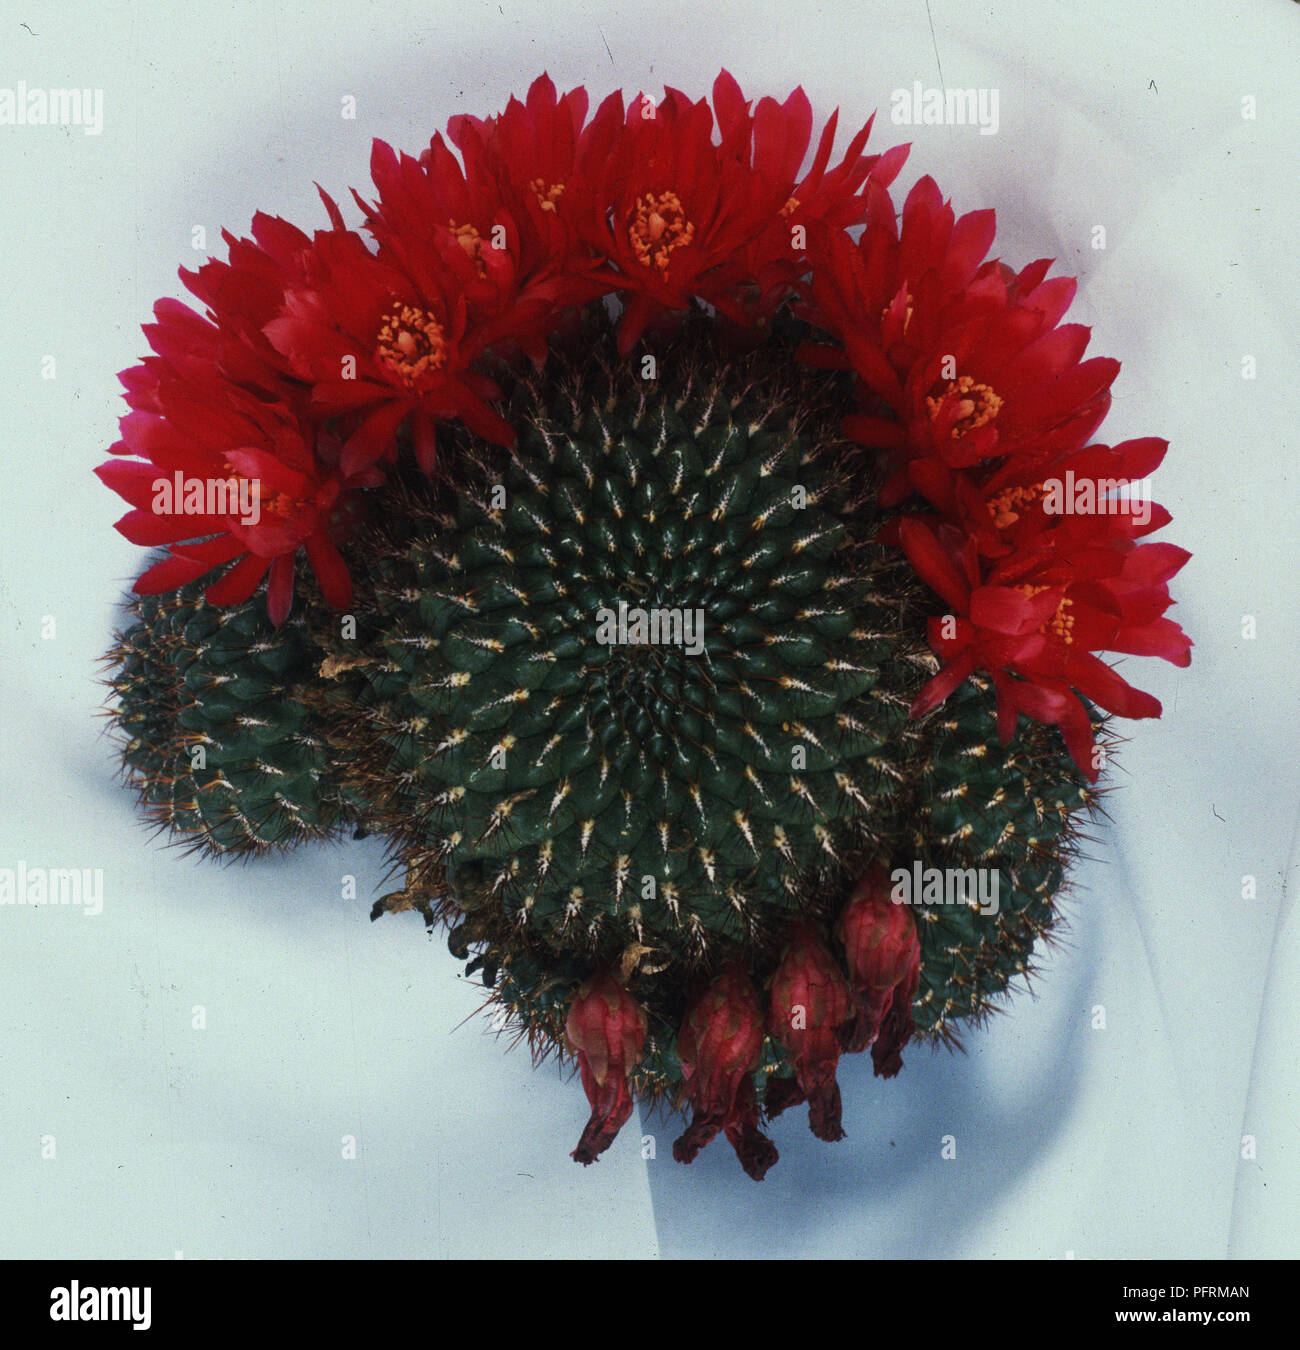 Rebutia steinbachii f. tiraquensis cactus with red flowers, view from above Stock Photo